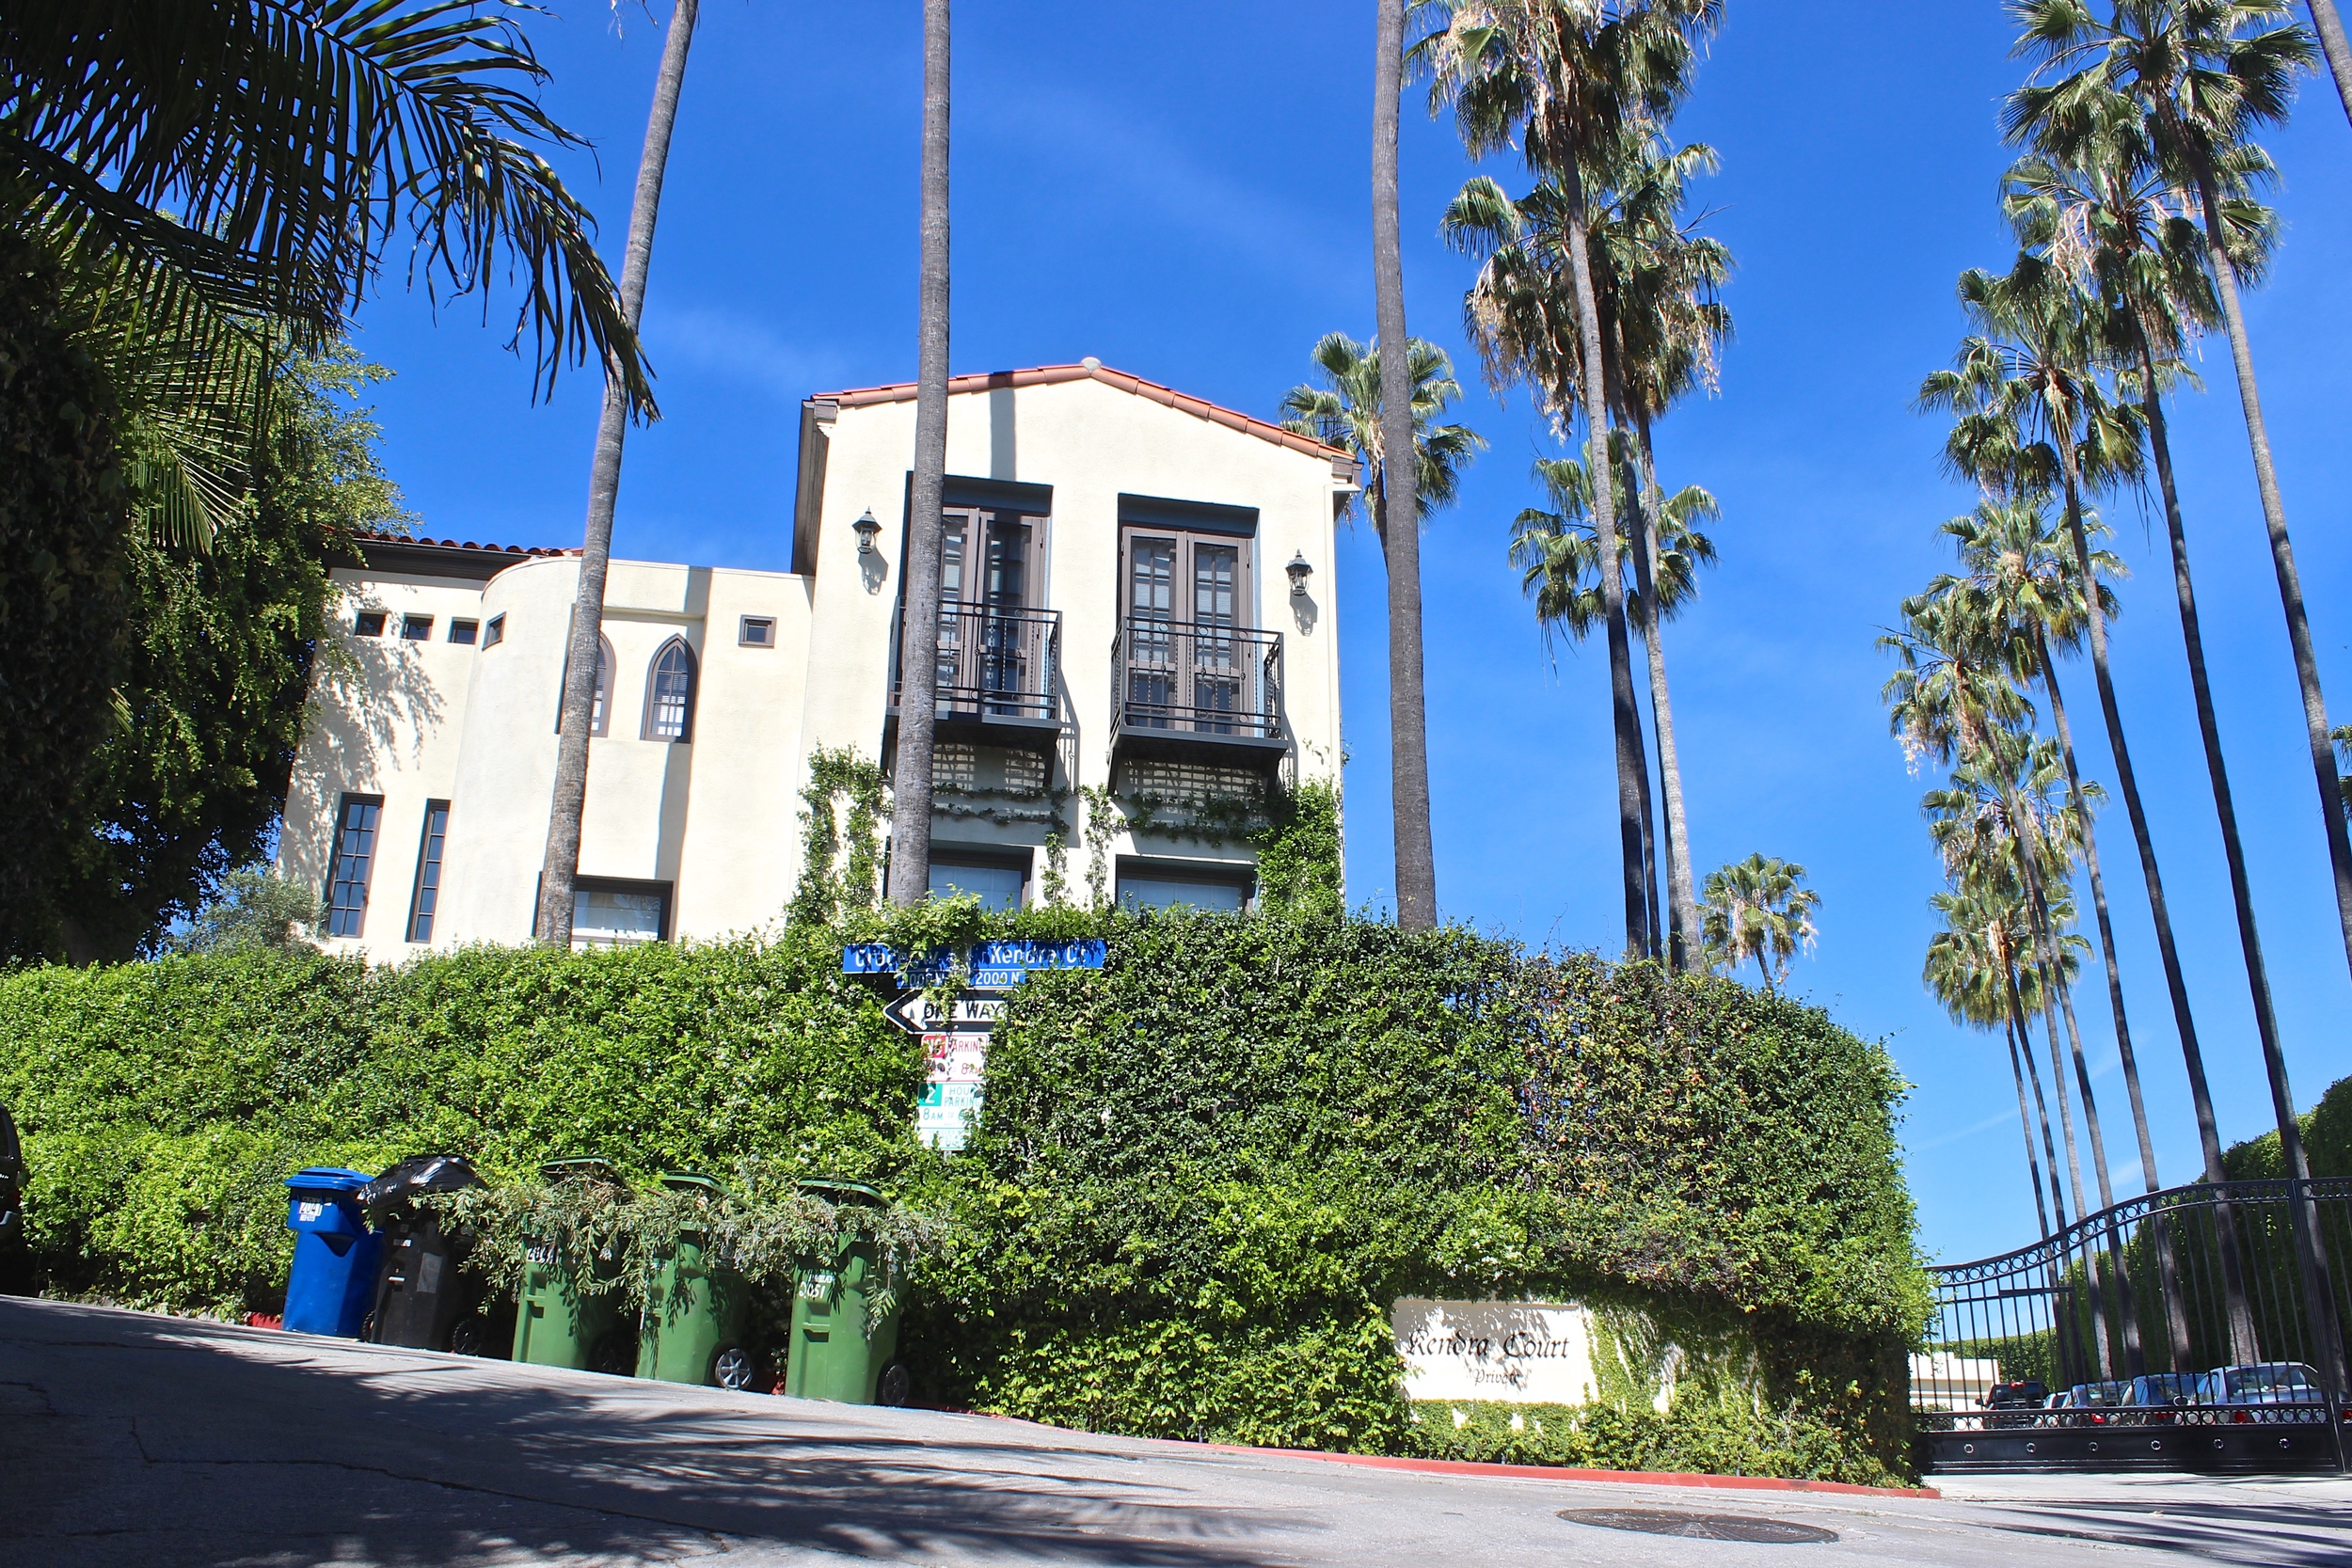 Mission style multi unit condo with a vine covered wall and palm trees lining the gated parking area.